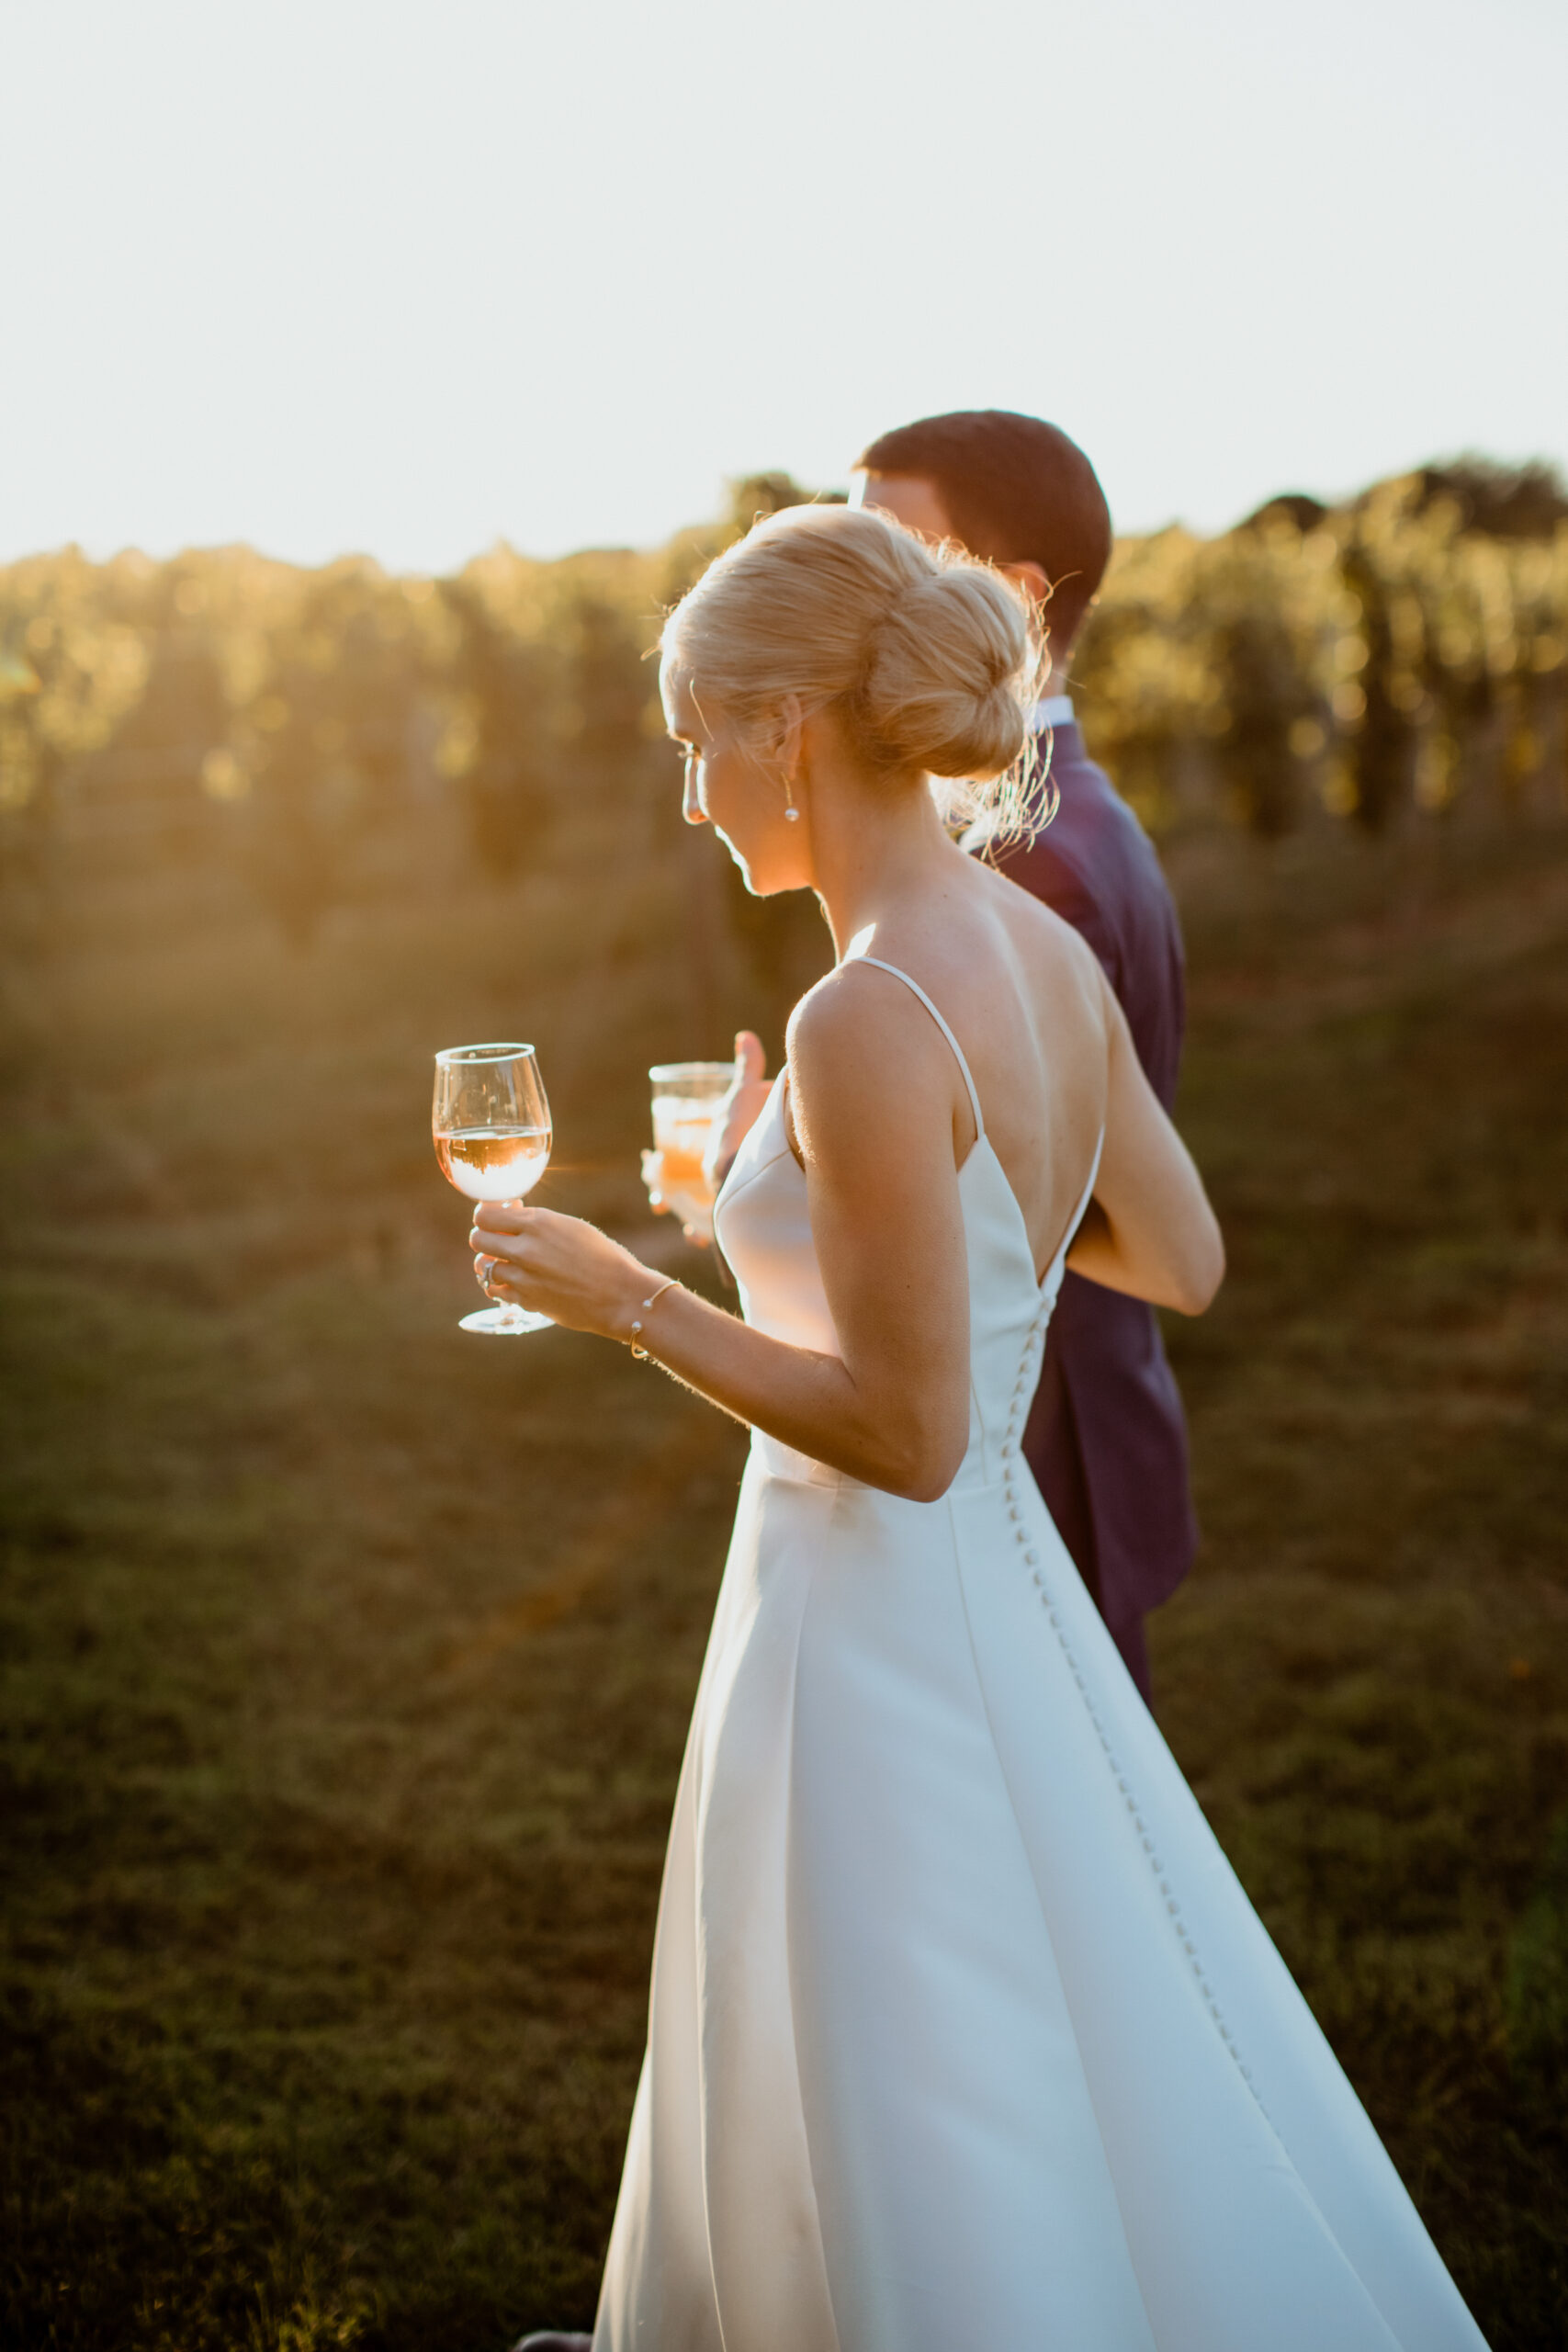 Stunning bride and groom walk in the vineyard while sharing a glass of wine